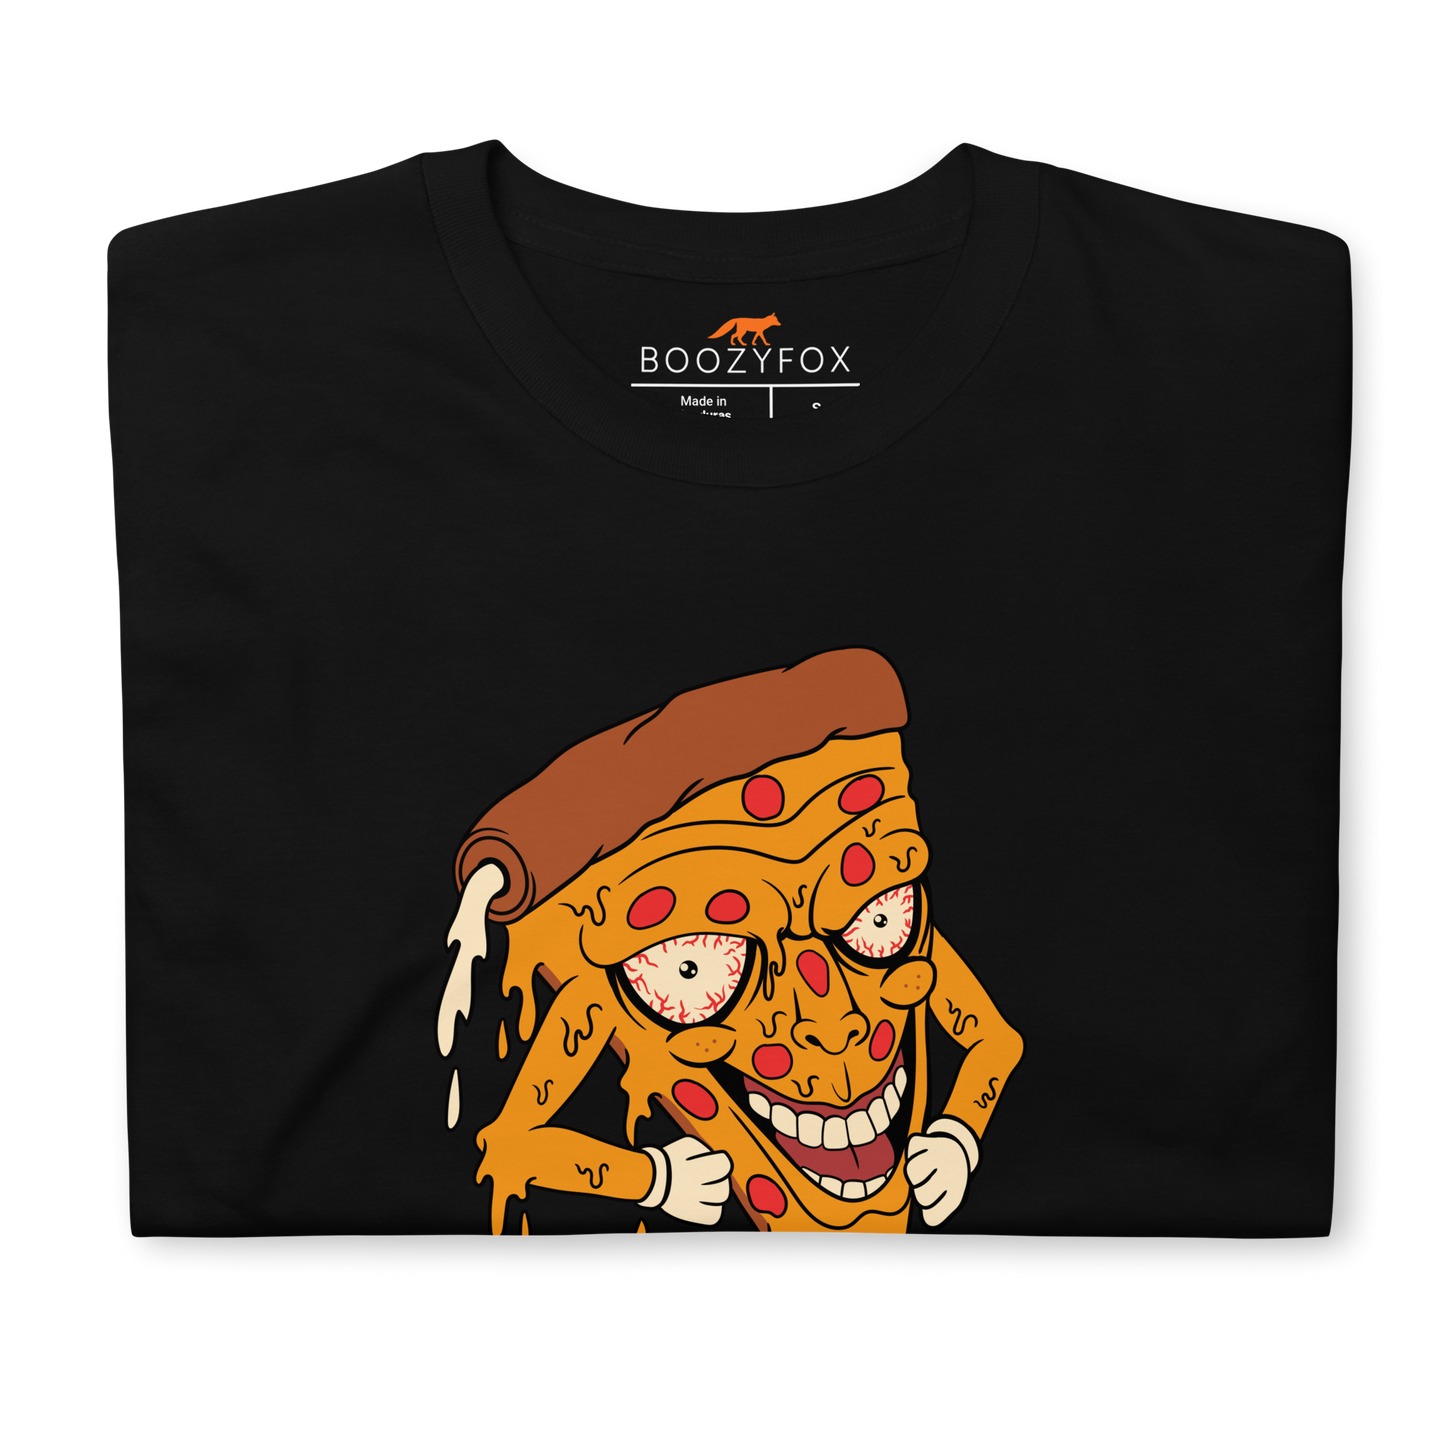 Front details of a Black Melting Pizza T-Shirt featuring the hilarious Meltdown Madness graphic on the chest - Funny Graphic Pizza T-Shirts - Boozy Fox